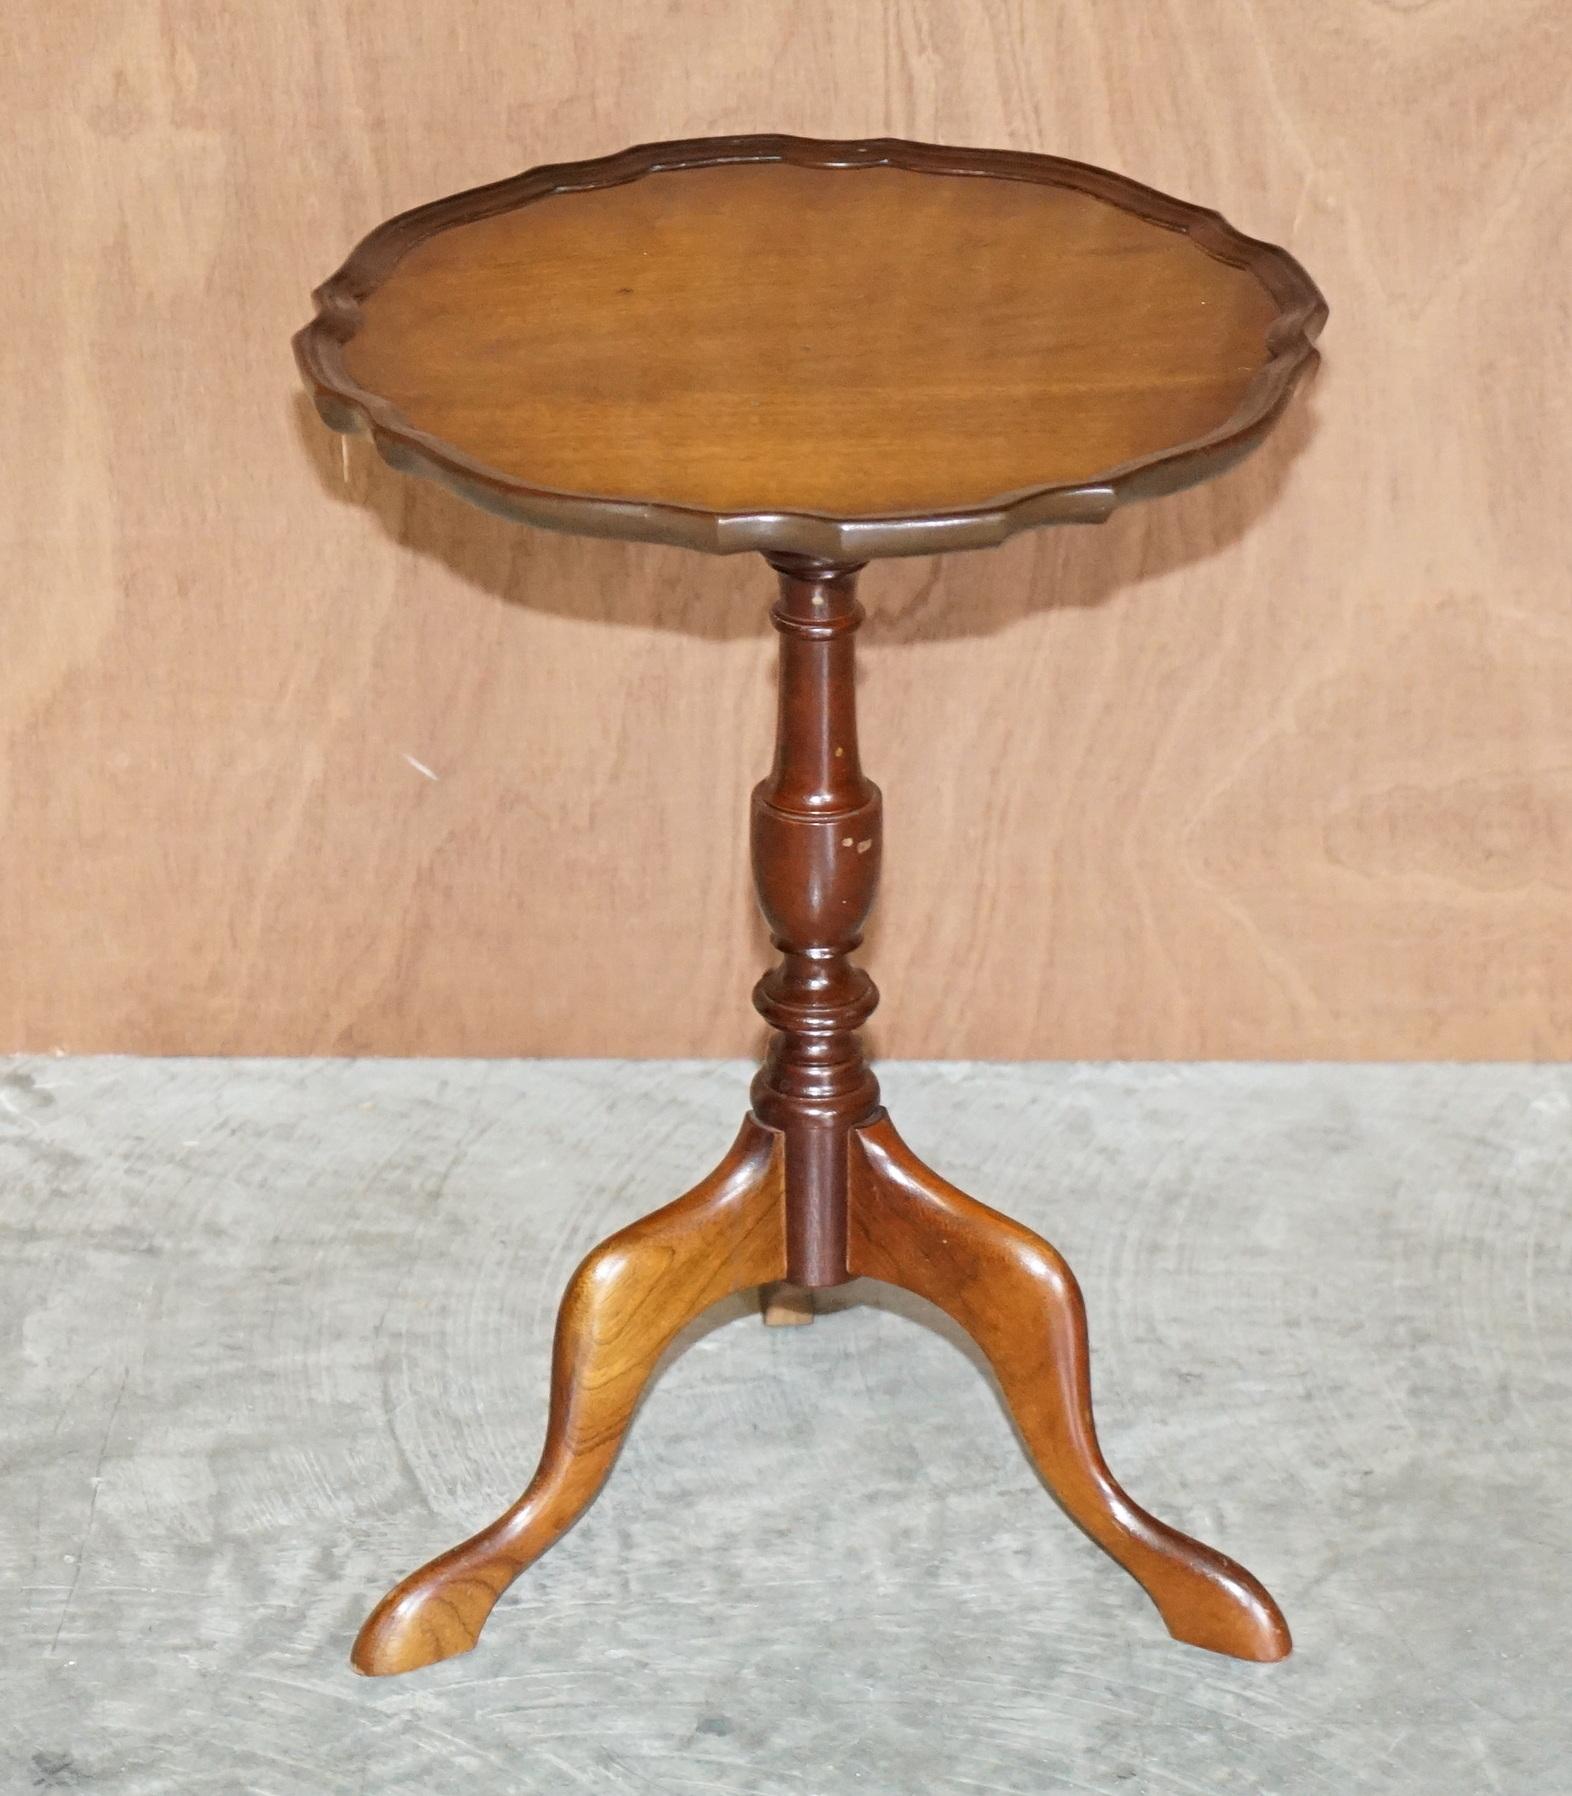 We are delighted to offer for sale this lovely vintage flamed Mahogany Pie crust edge lamp or side table.

A good-looking well-made tripod table in good, we have cleaned waxed and polished it from top to bottom, there will be normal patina marks